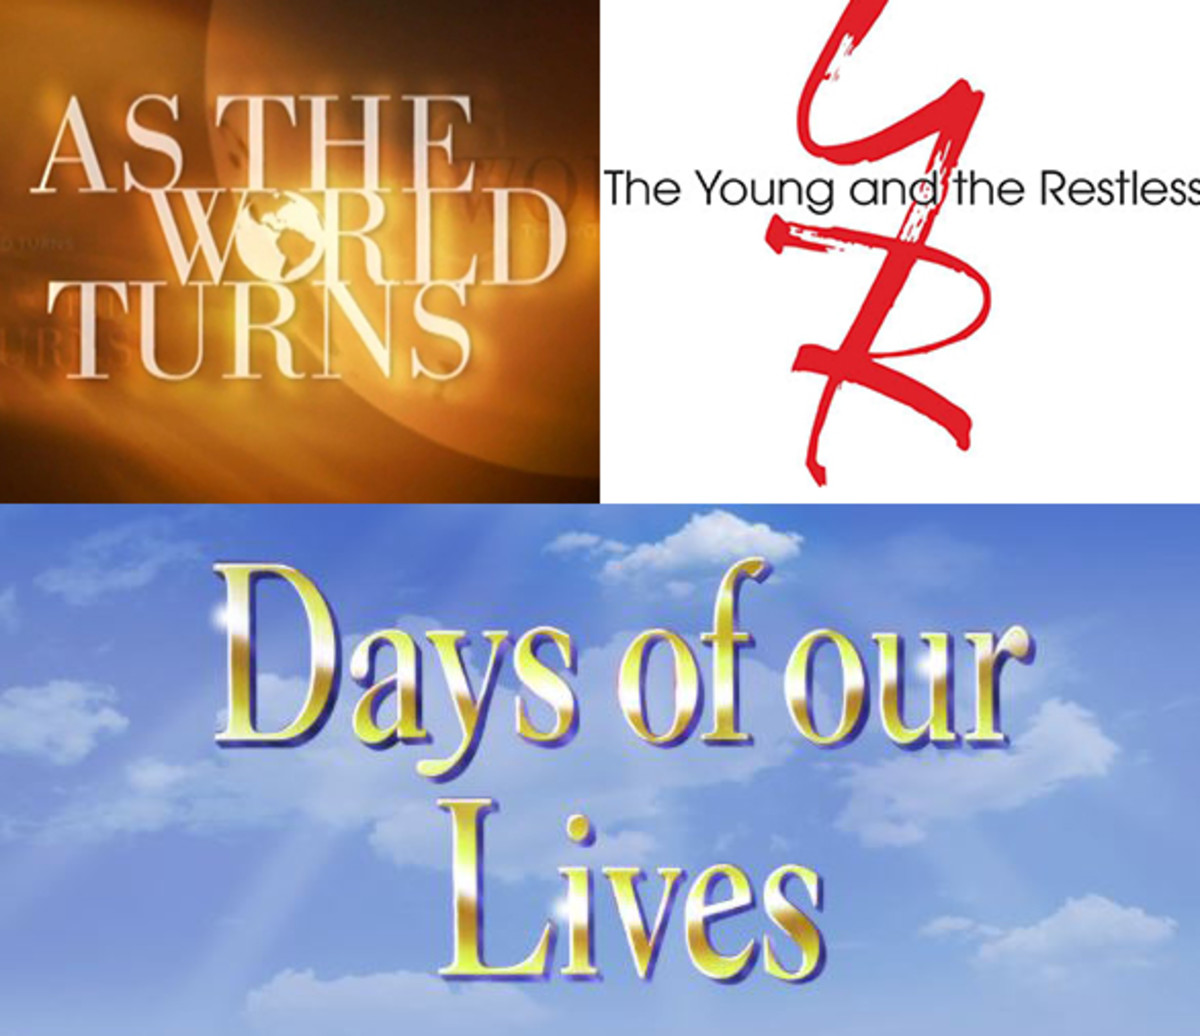 As the World Turns, The Young and the Restless, Days of Our Lives